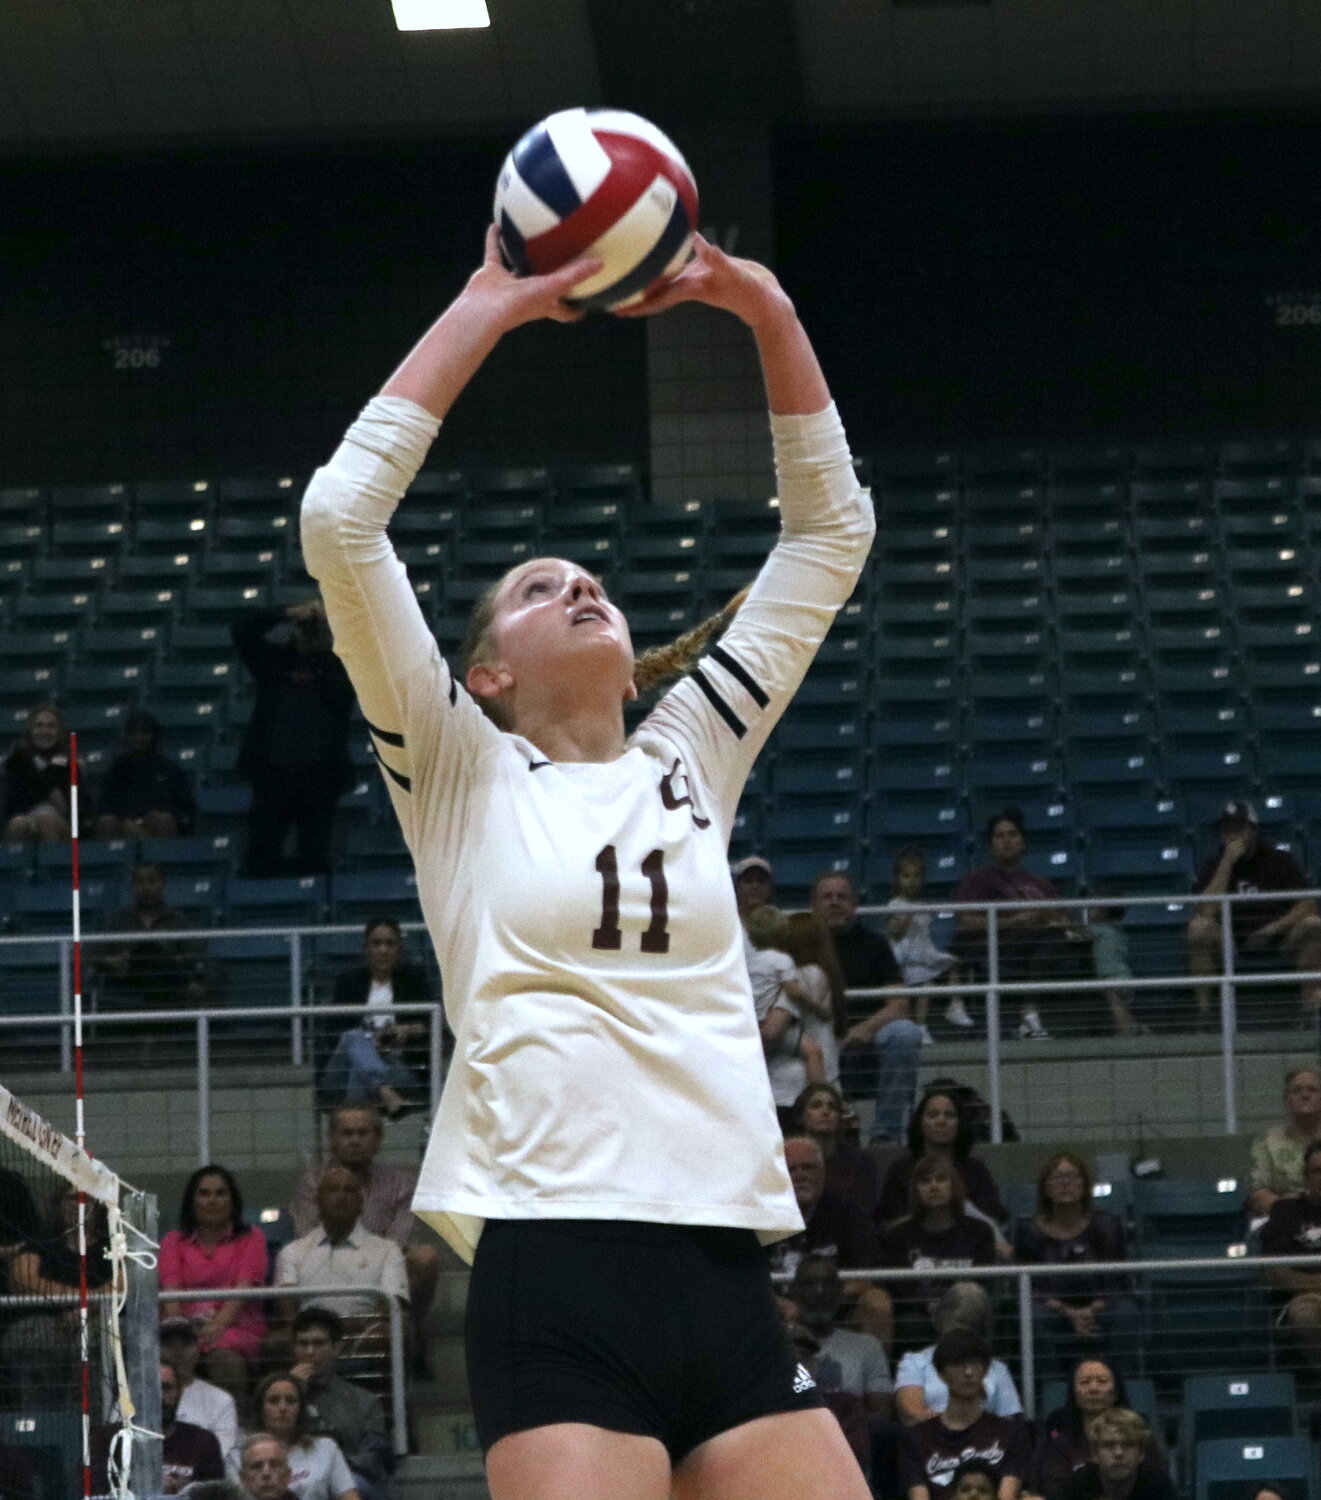 Kassie O’Brien sets the ball during Tuesday’s match between Cinco Ranch and Cy-Fair at the Merrell Center.